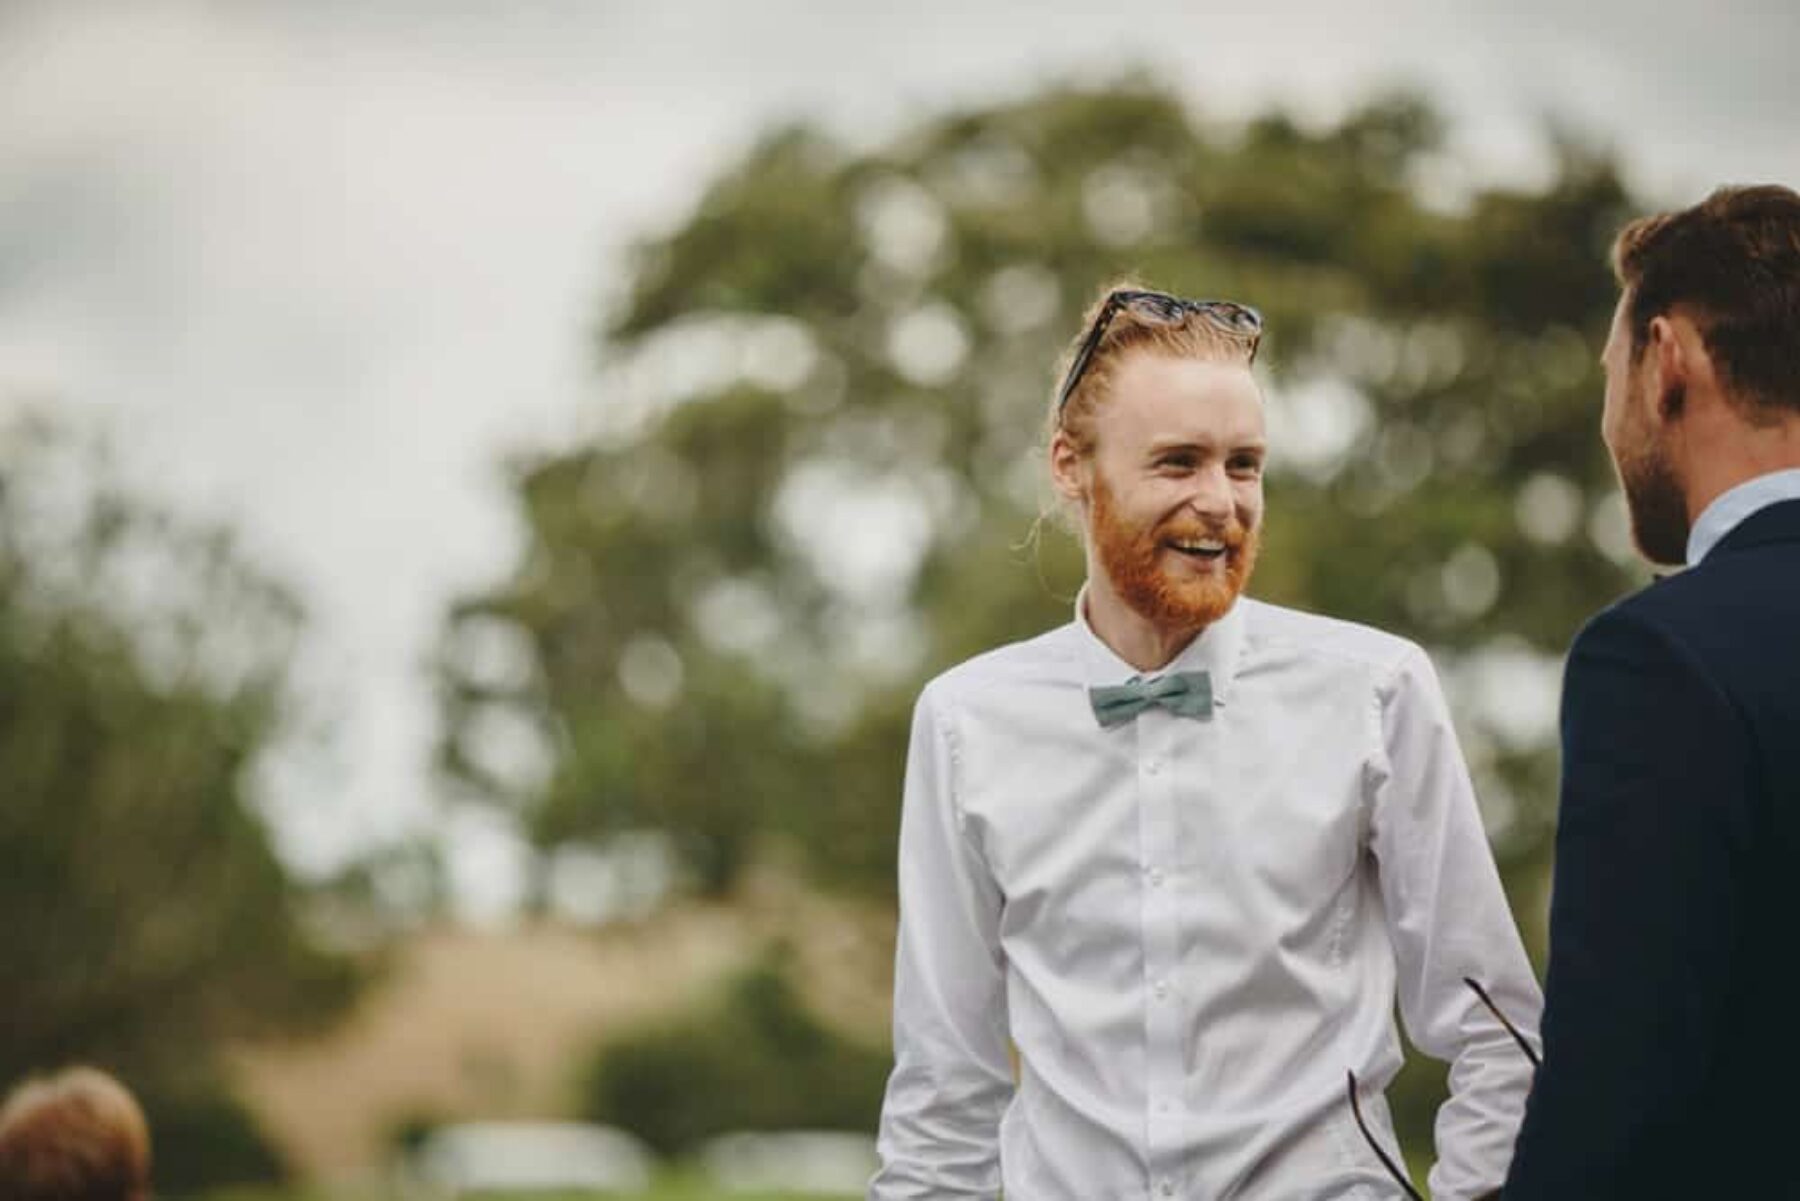 Relaxed picnic wedding, Aukland | Photography by A Couple of Night Owls